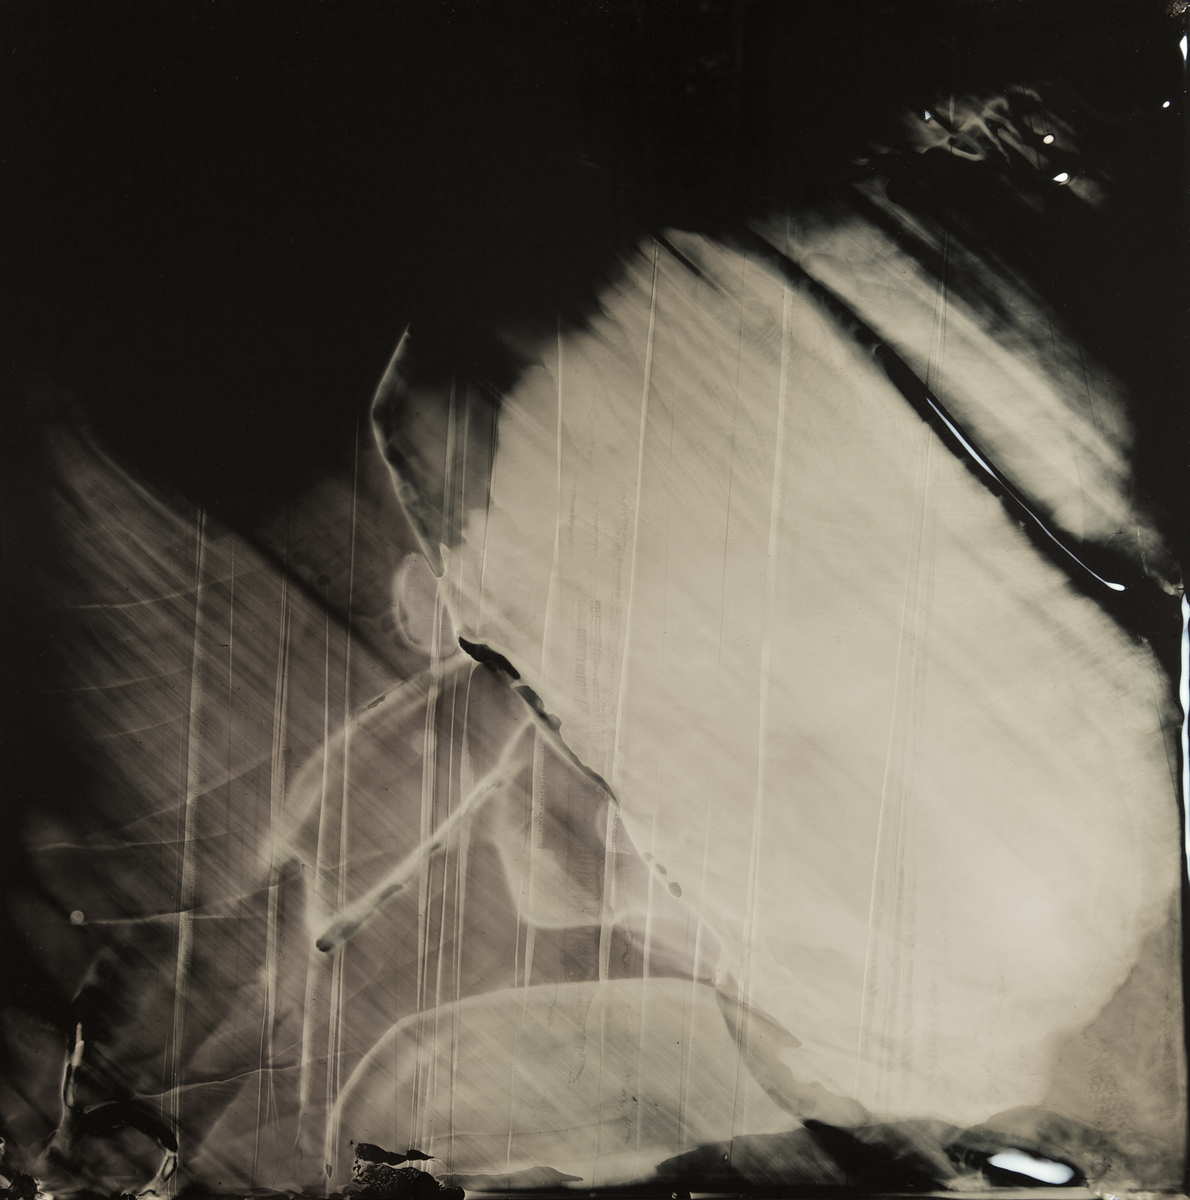 2:04 PM, April 8, 2015. Collodion tintype, 14x14 inches.